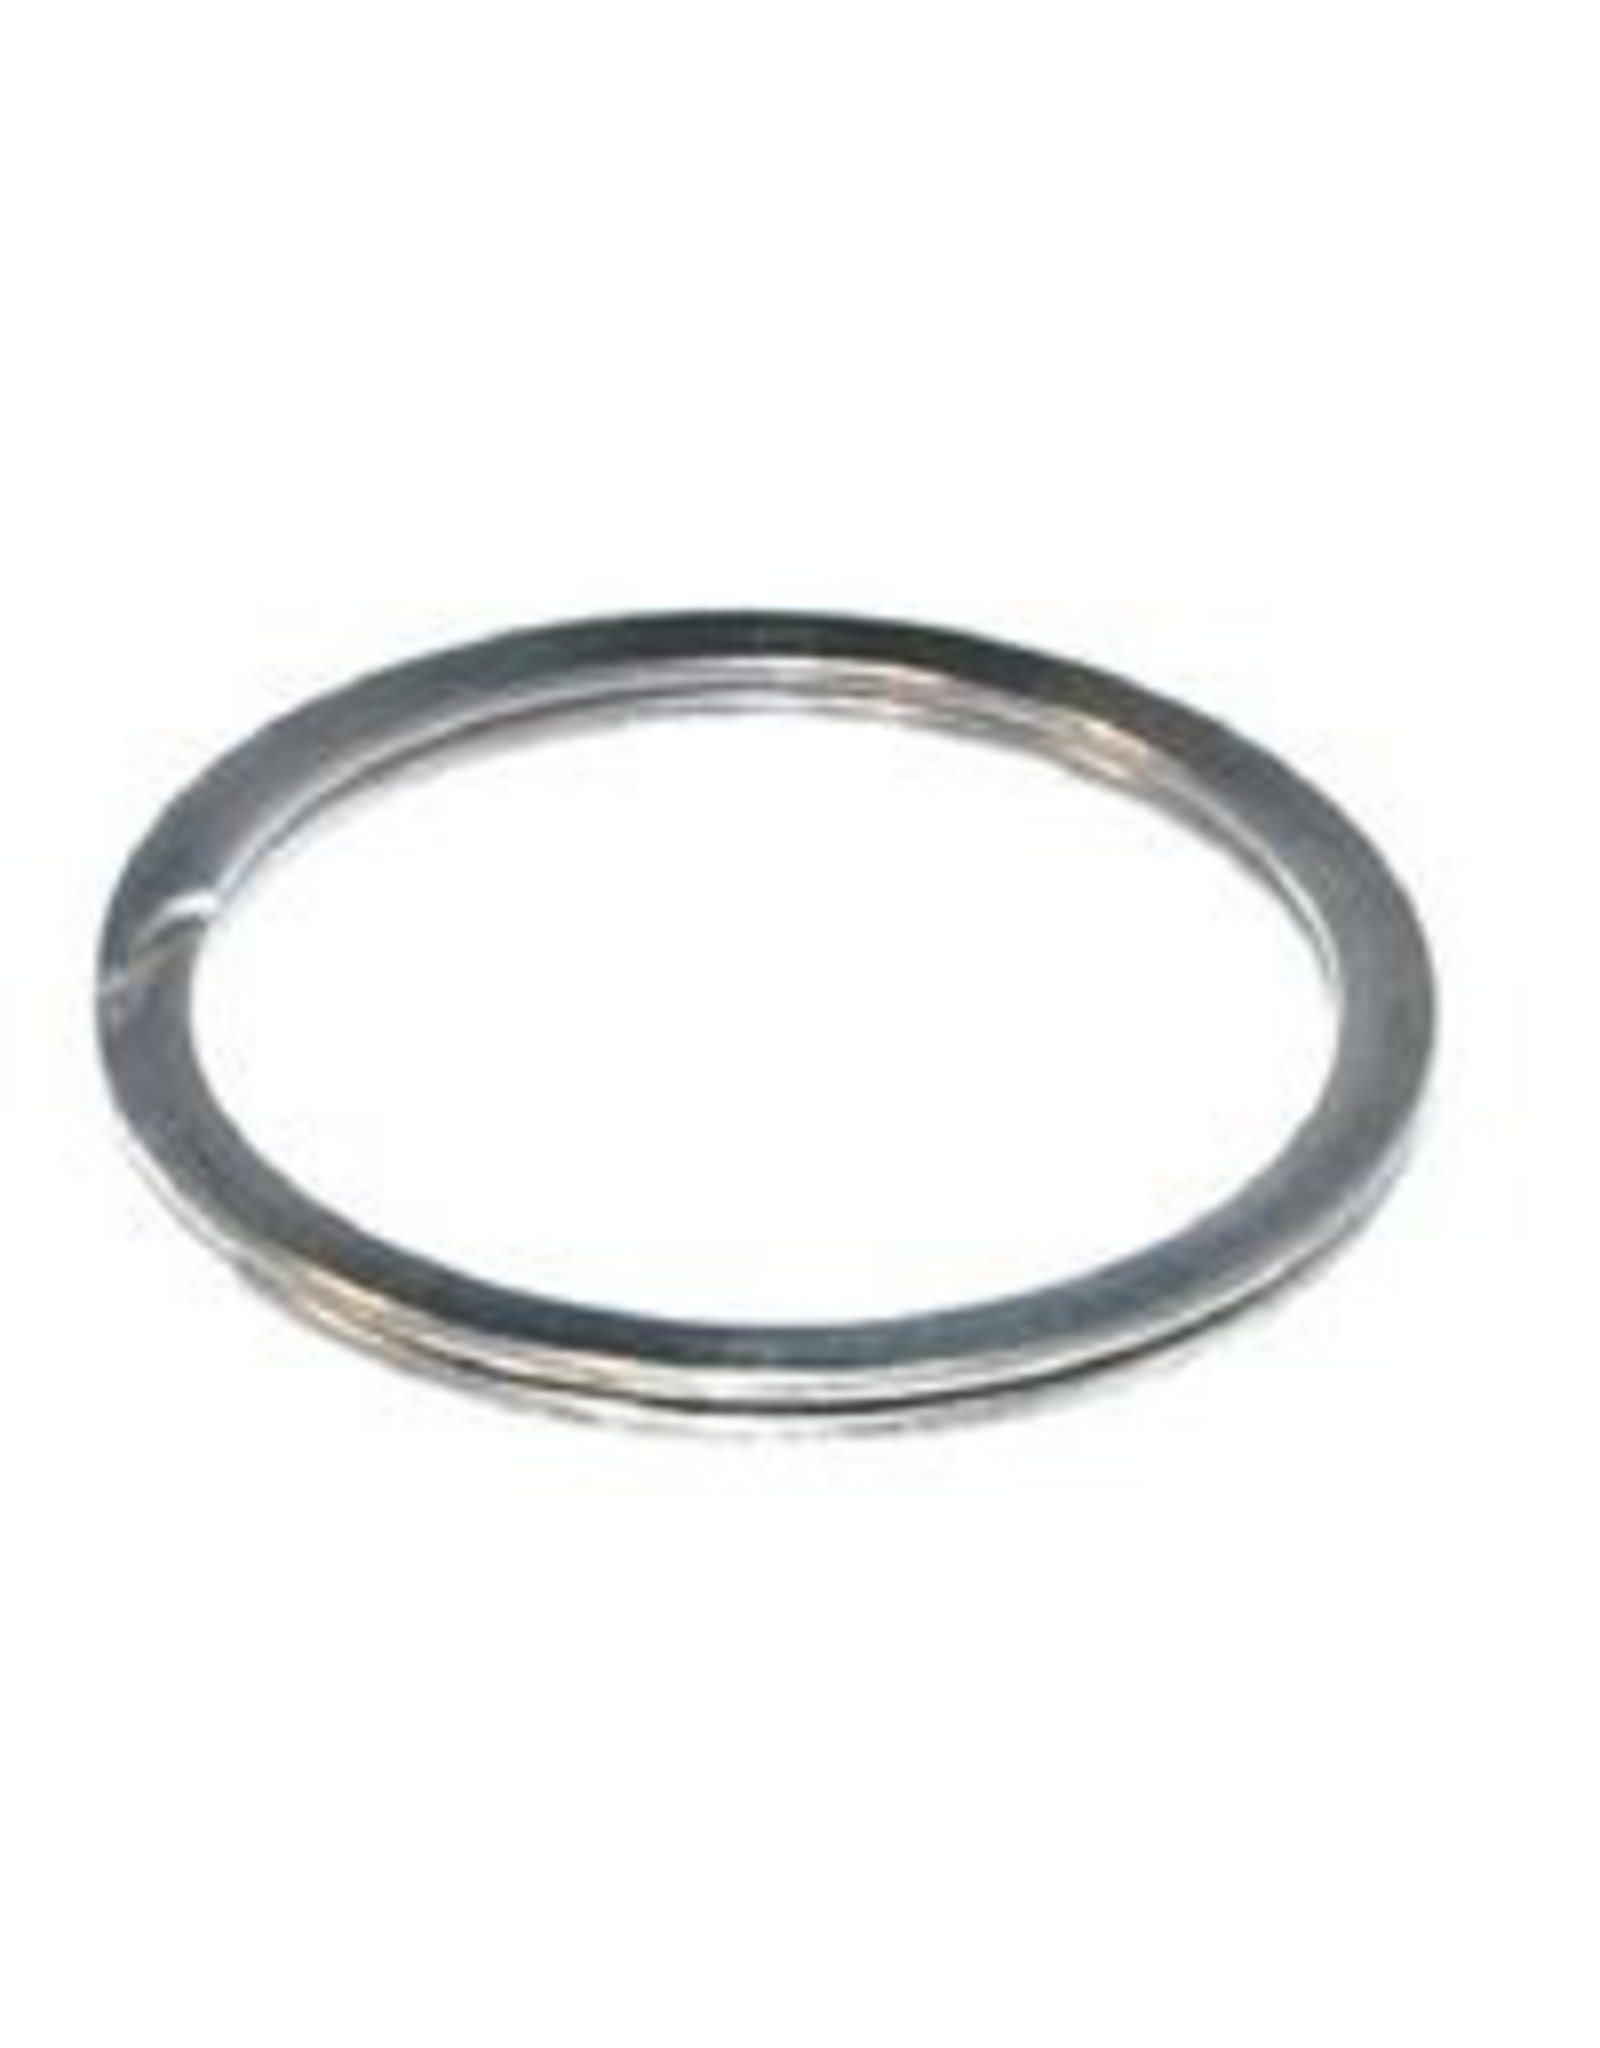 OMAX Style Retaining Ring, Port Adapter